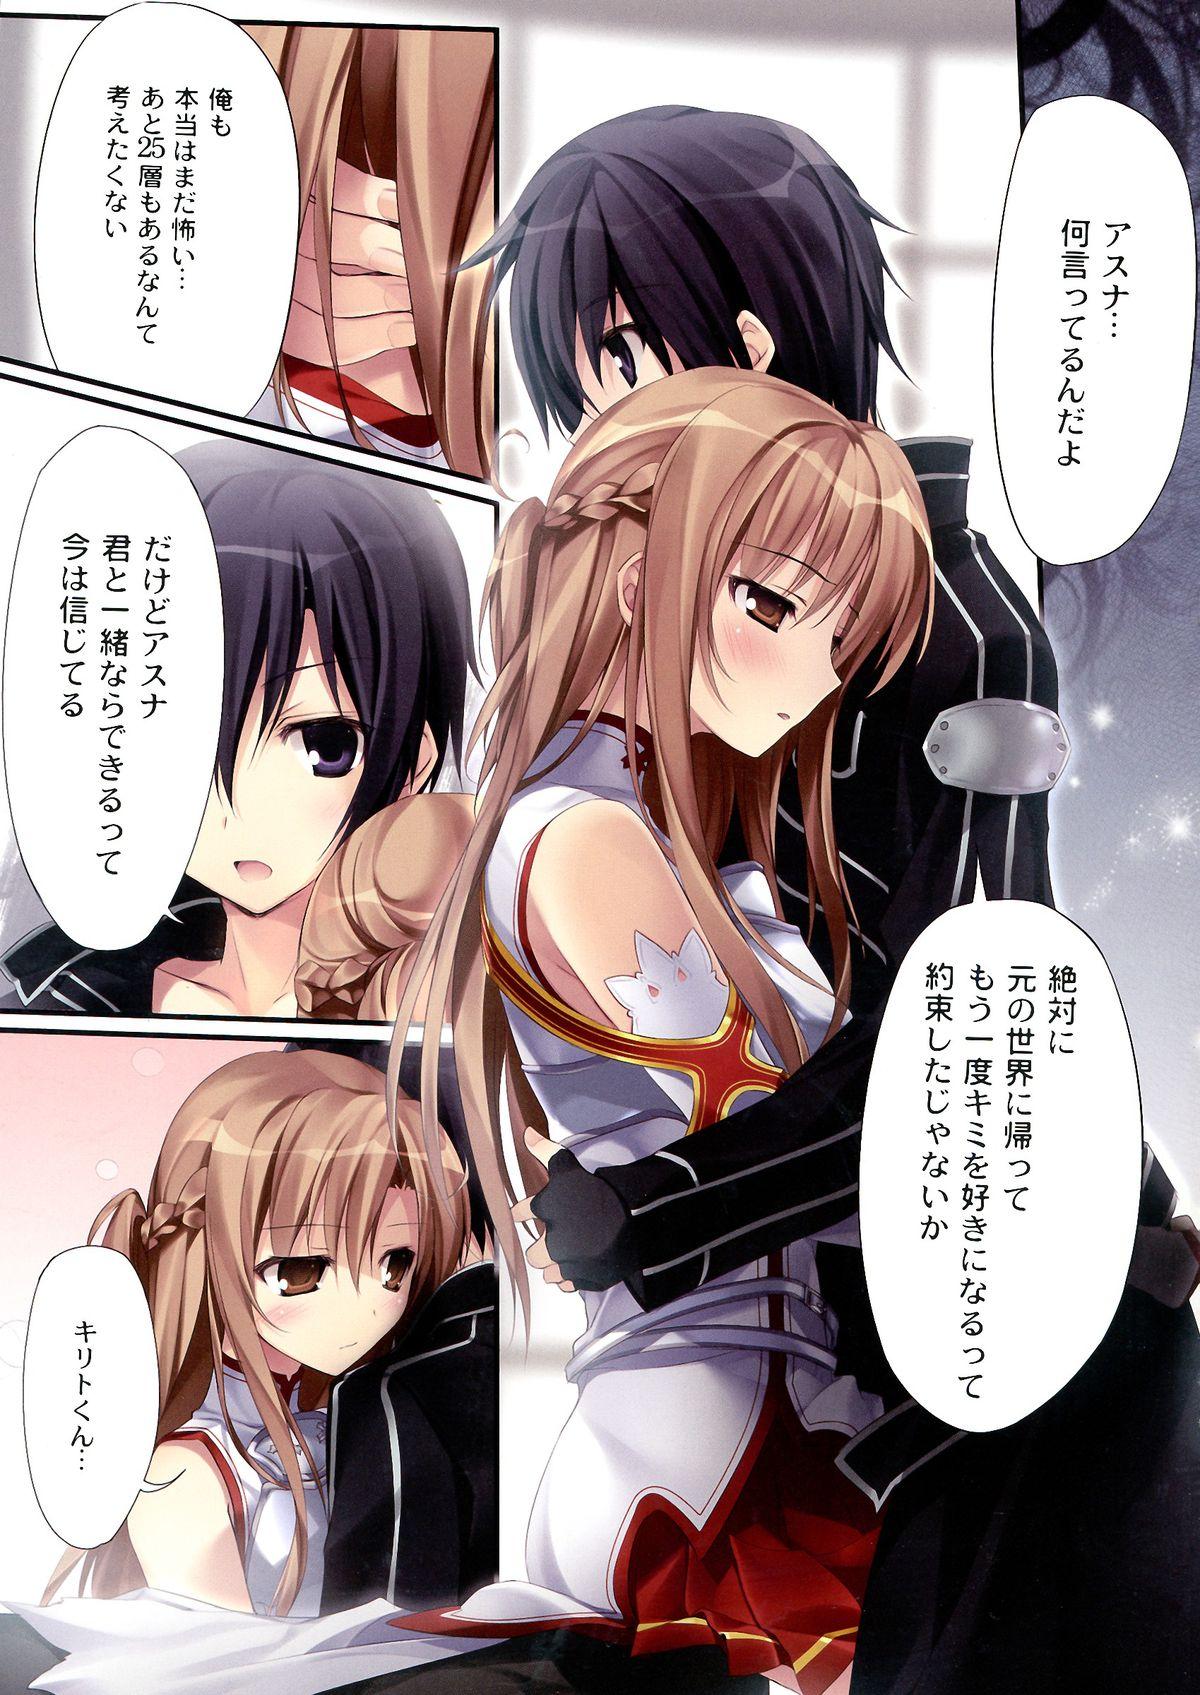 Girl Gets Fucked KARORFUL MIX EX9 - Sword art online Young - Page 5